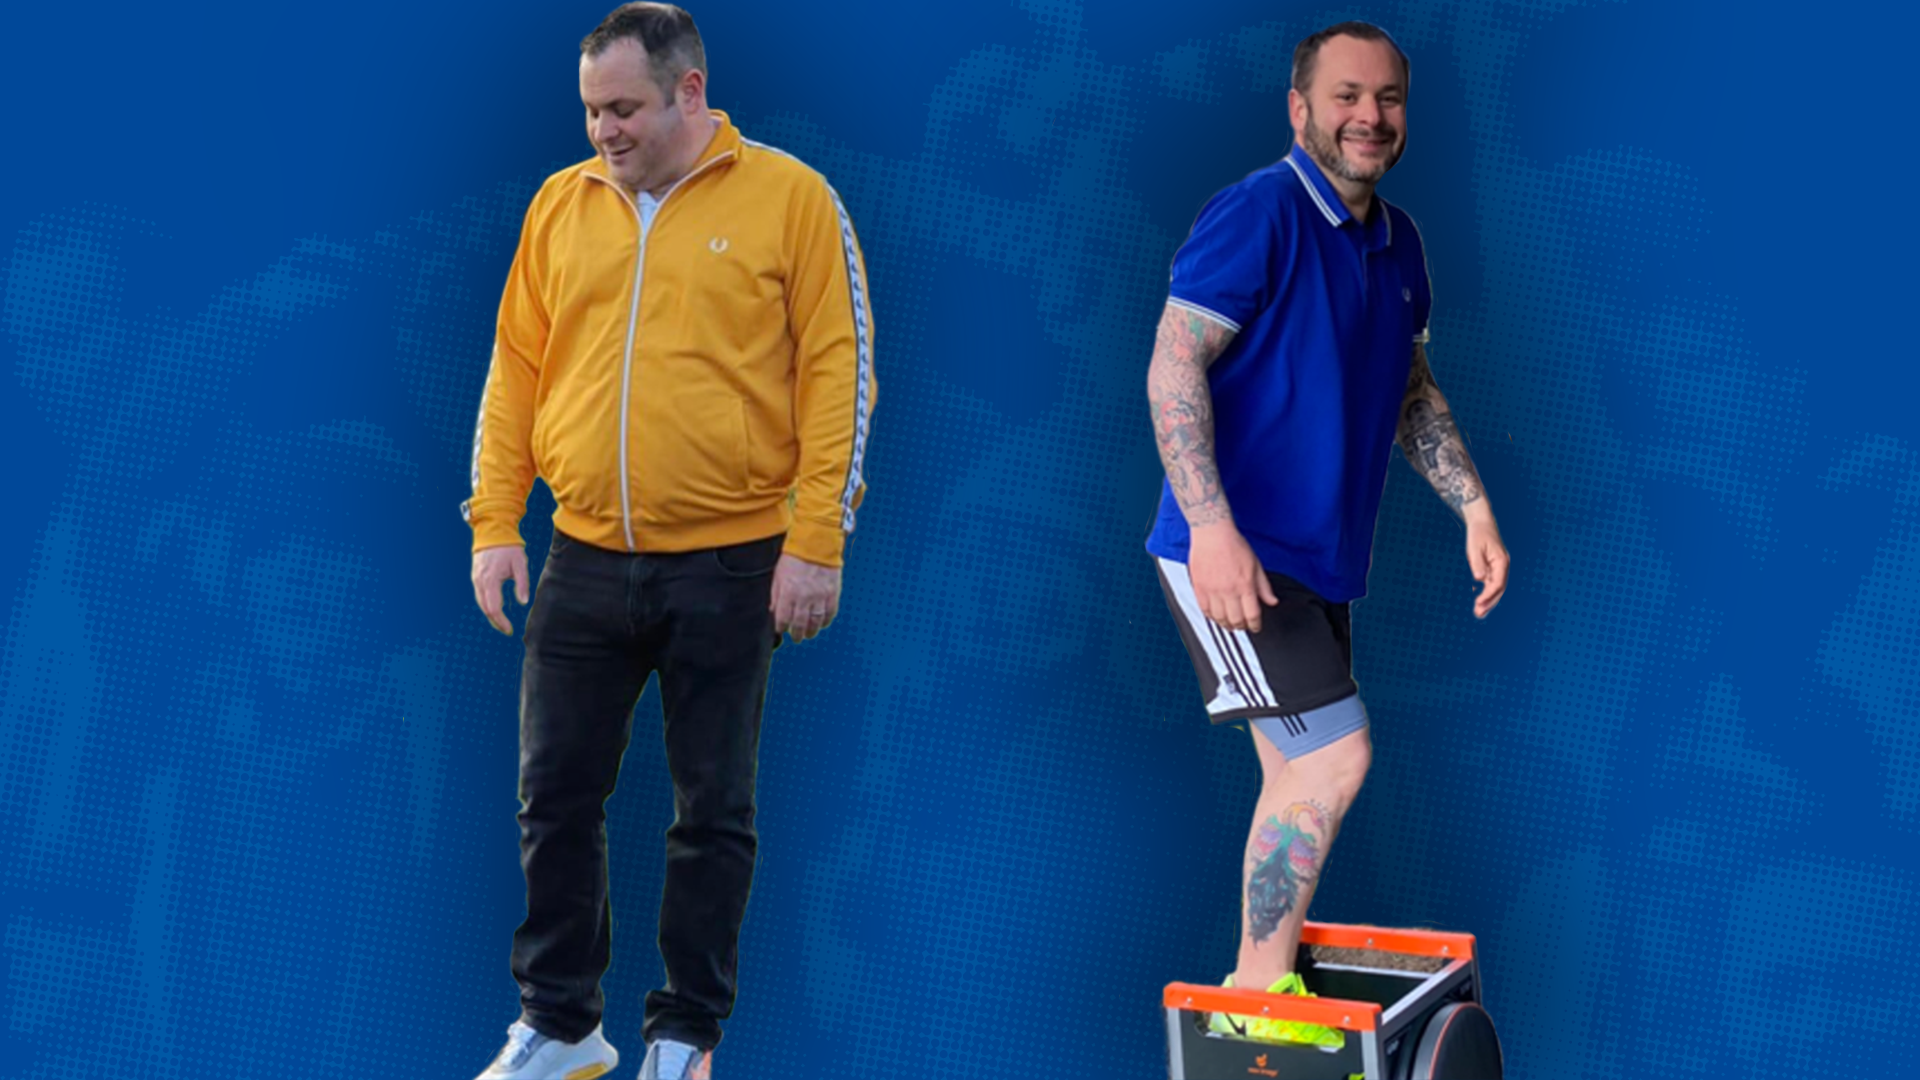 Albion in the Community’s Kick Off the Weight programme has helped a participant drop an incredible 17.2kg